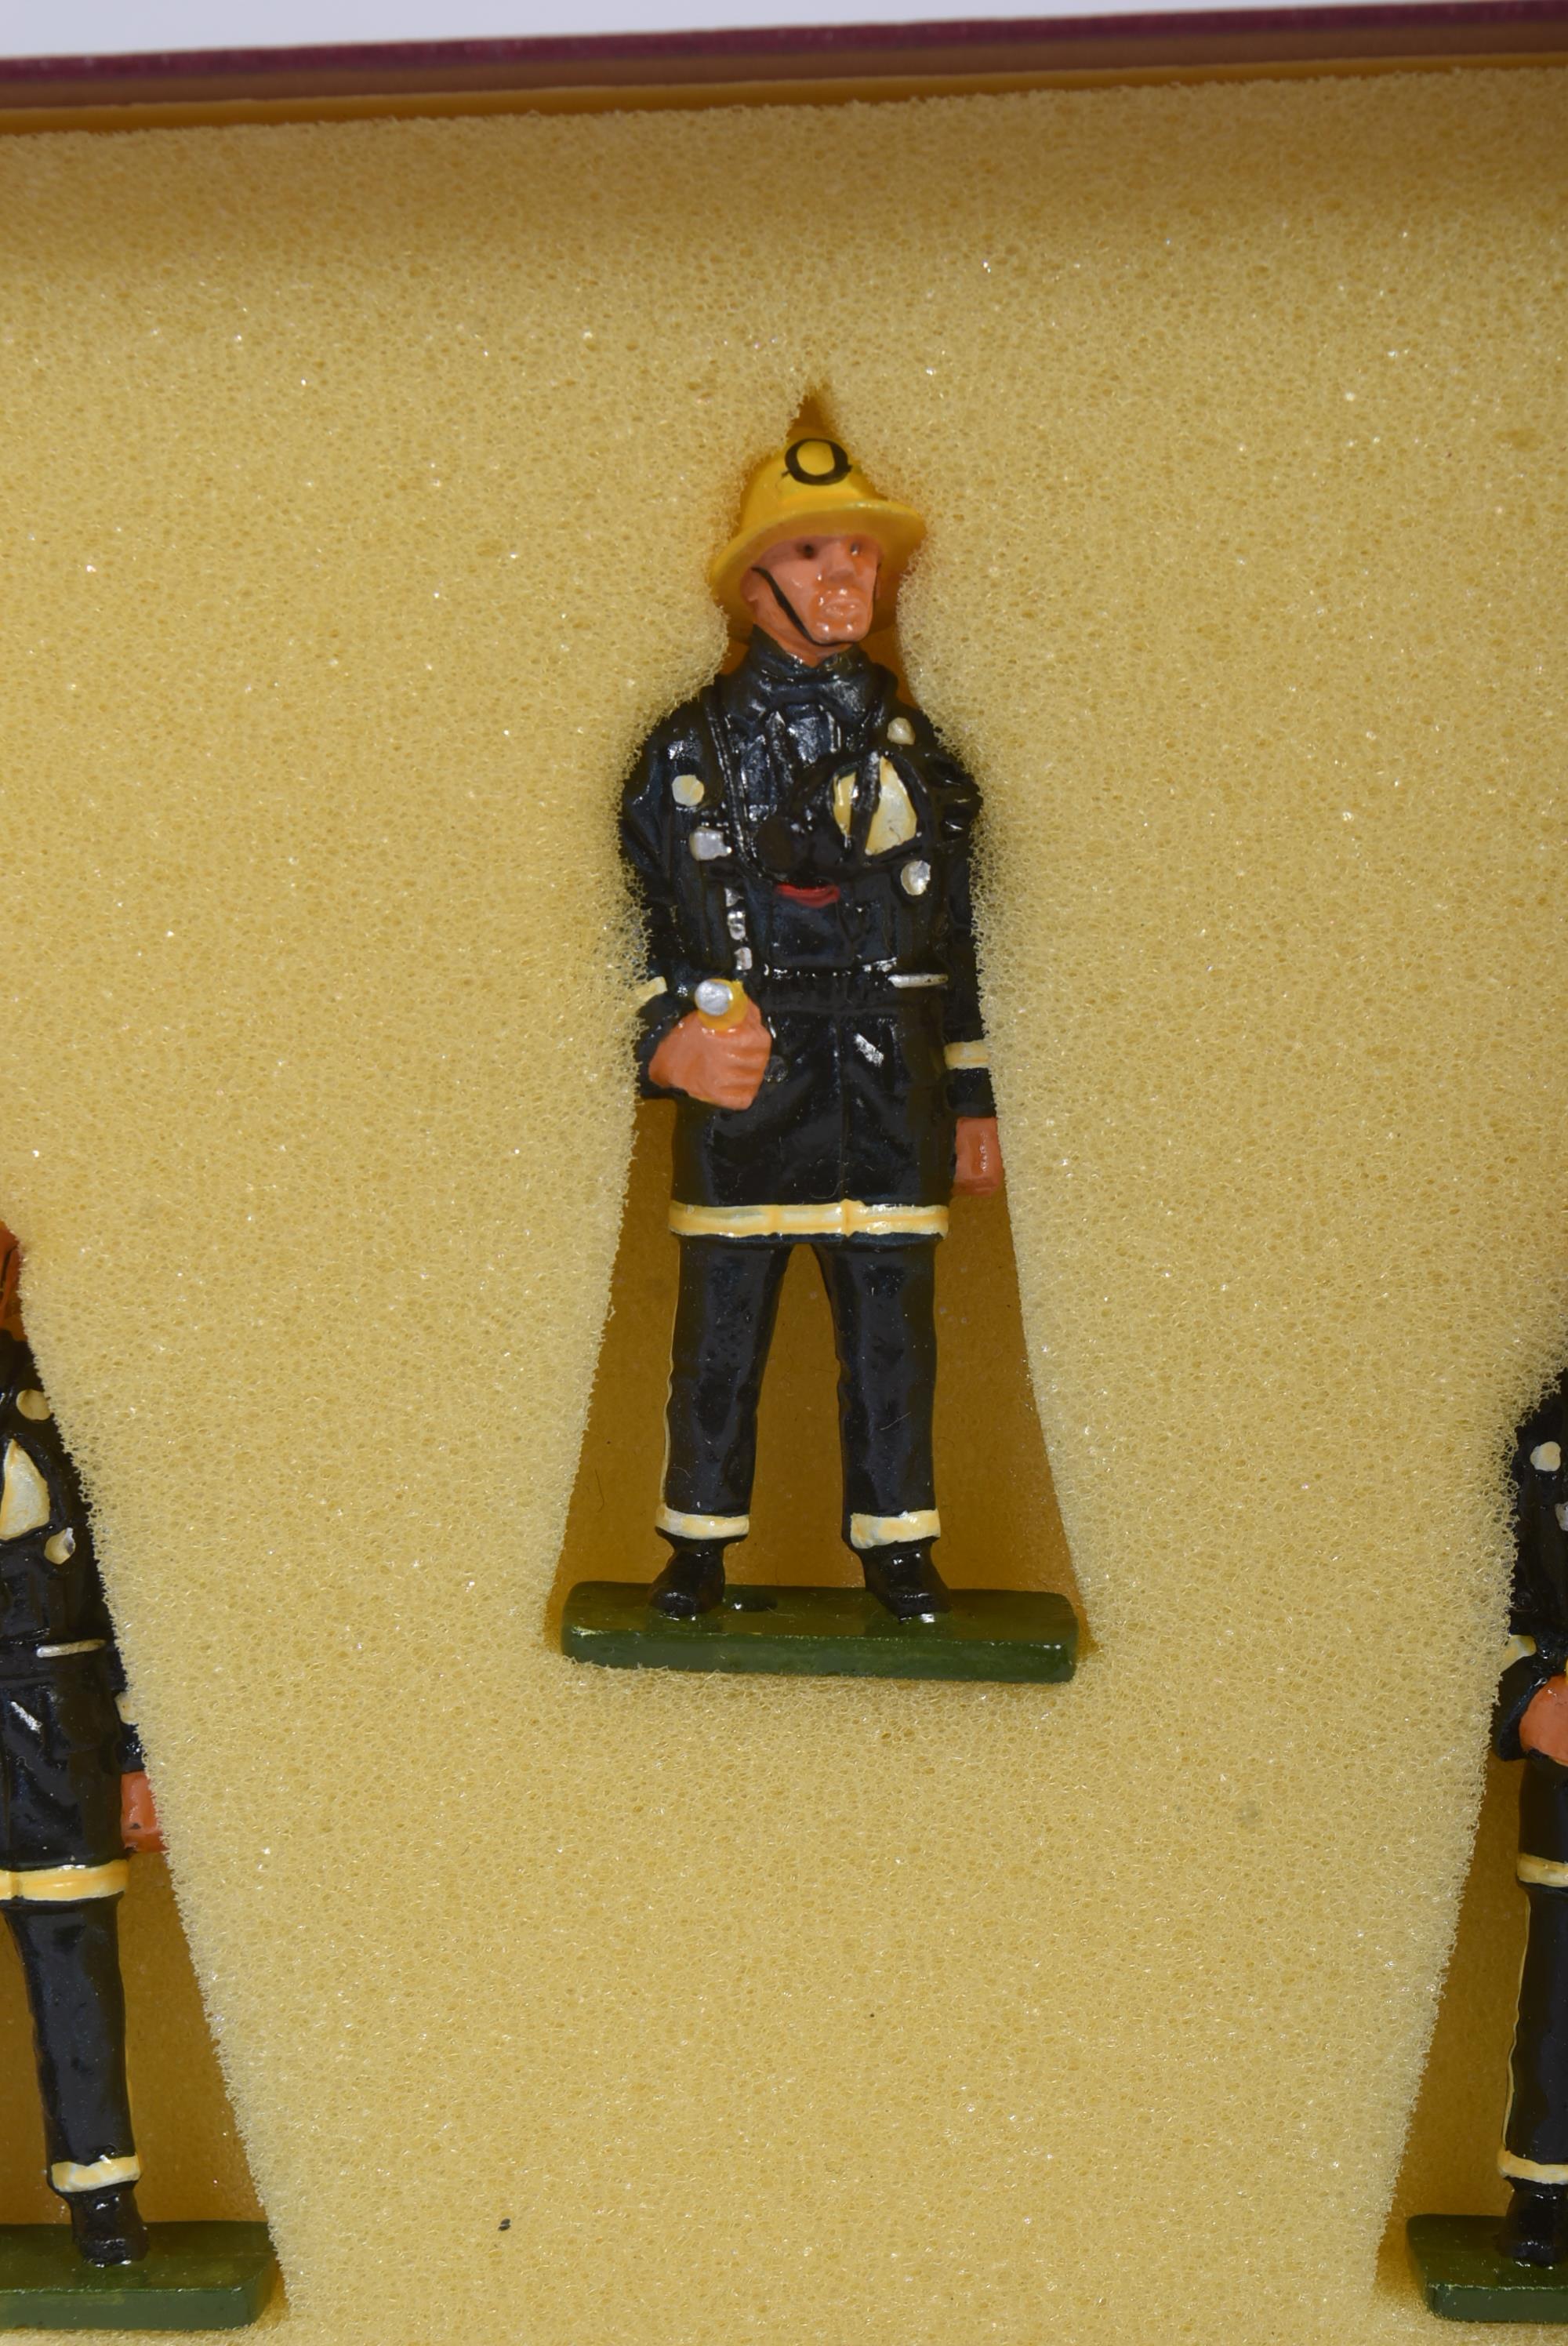 VINTAGE WHITE METAL FIRE FIGHTER MODEL FIGURINES - Image 3 of 5